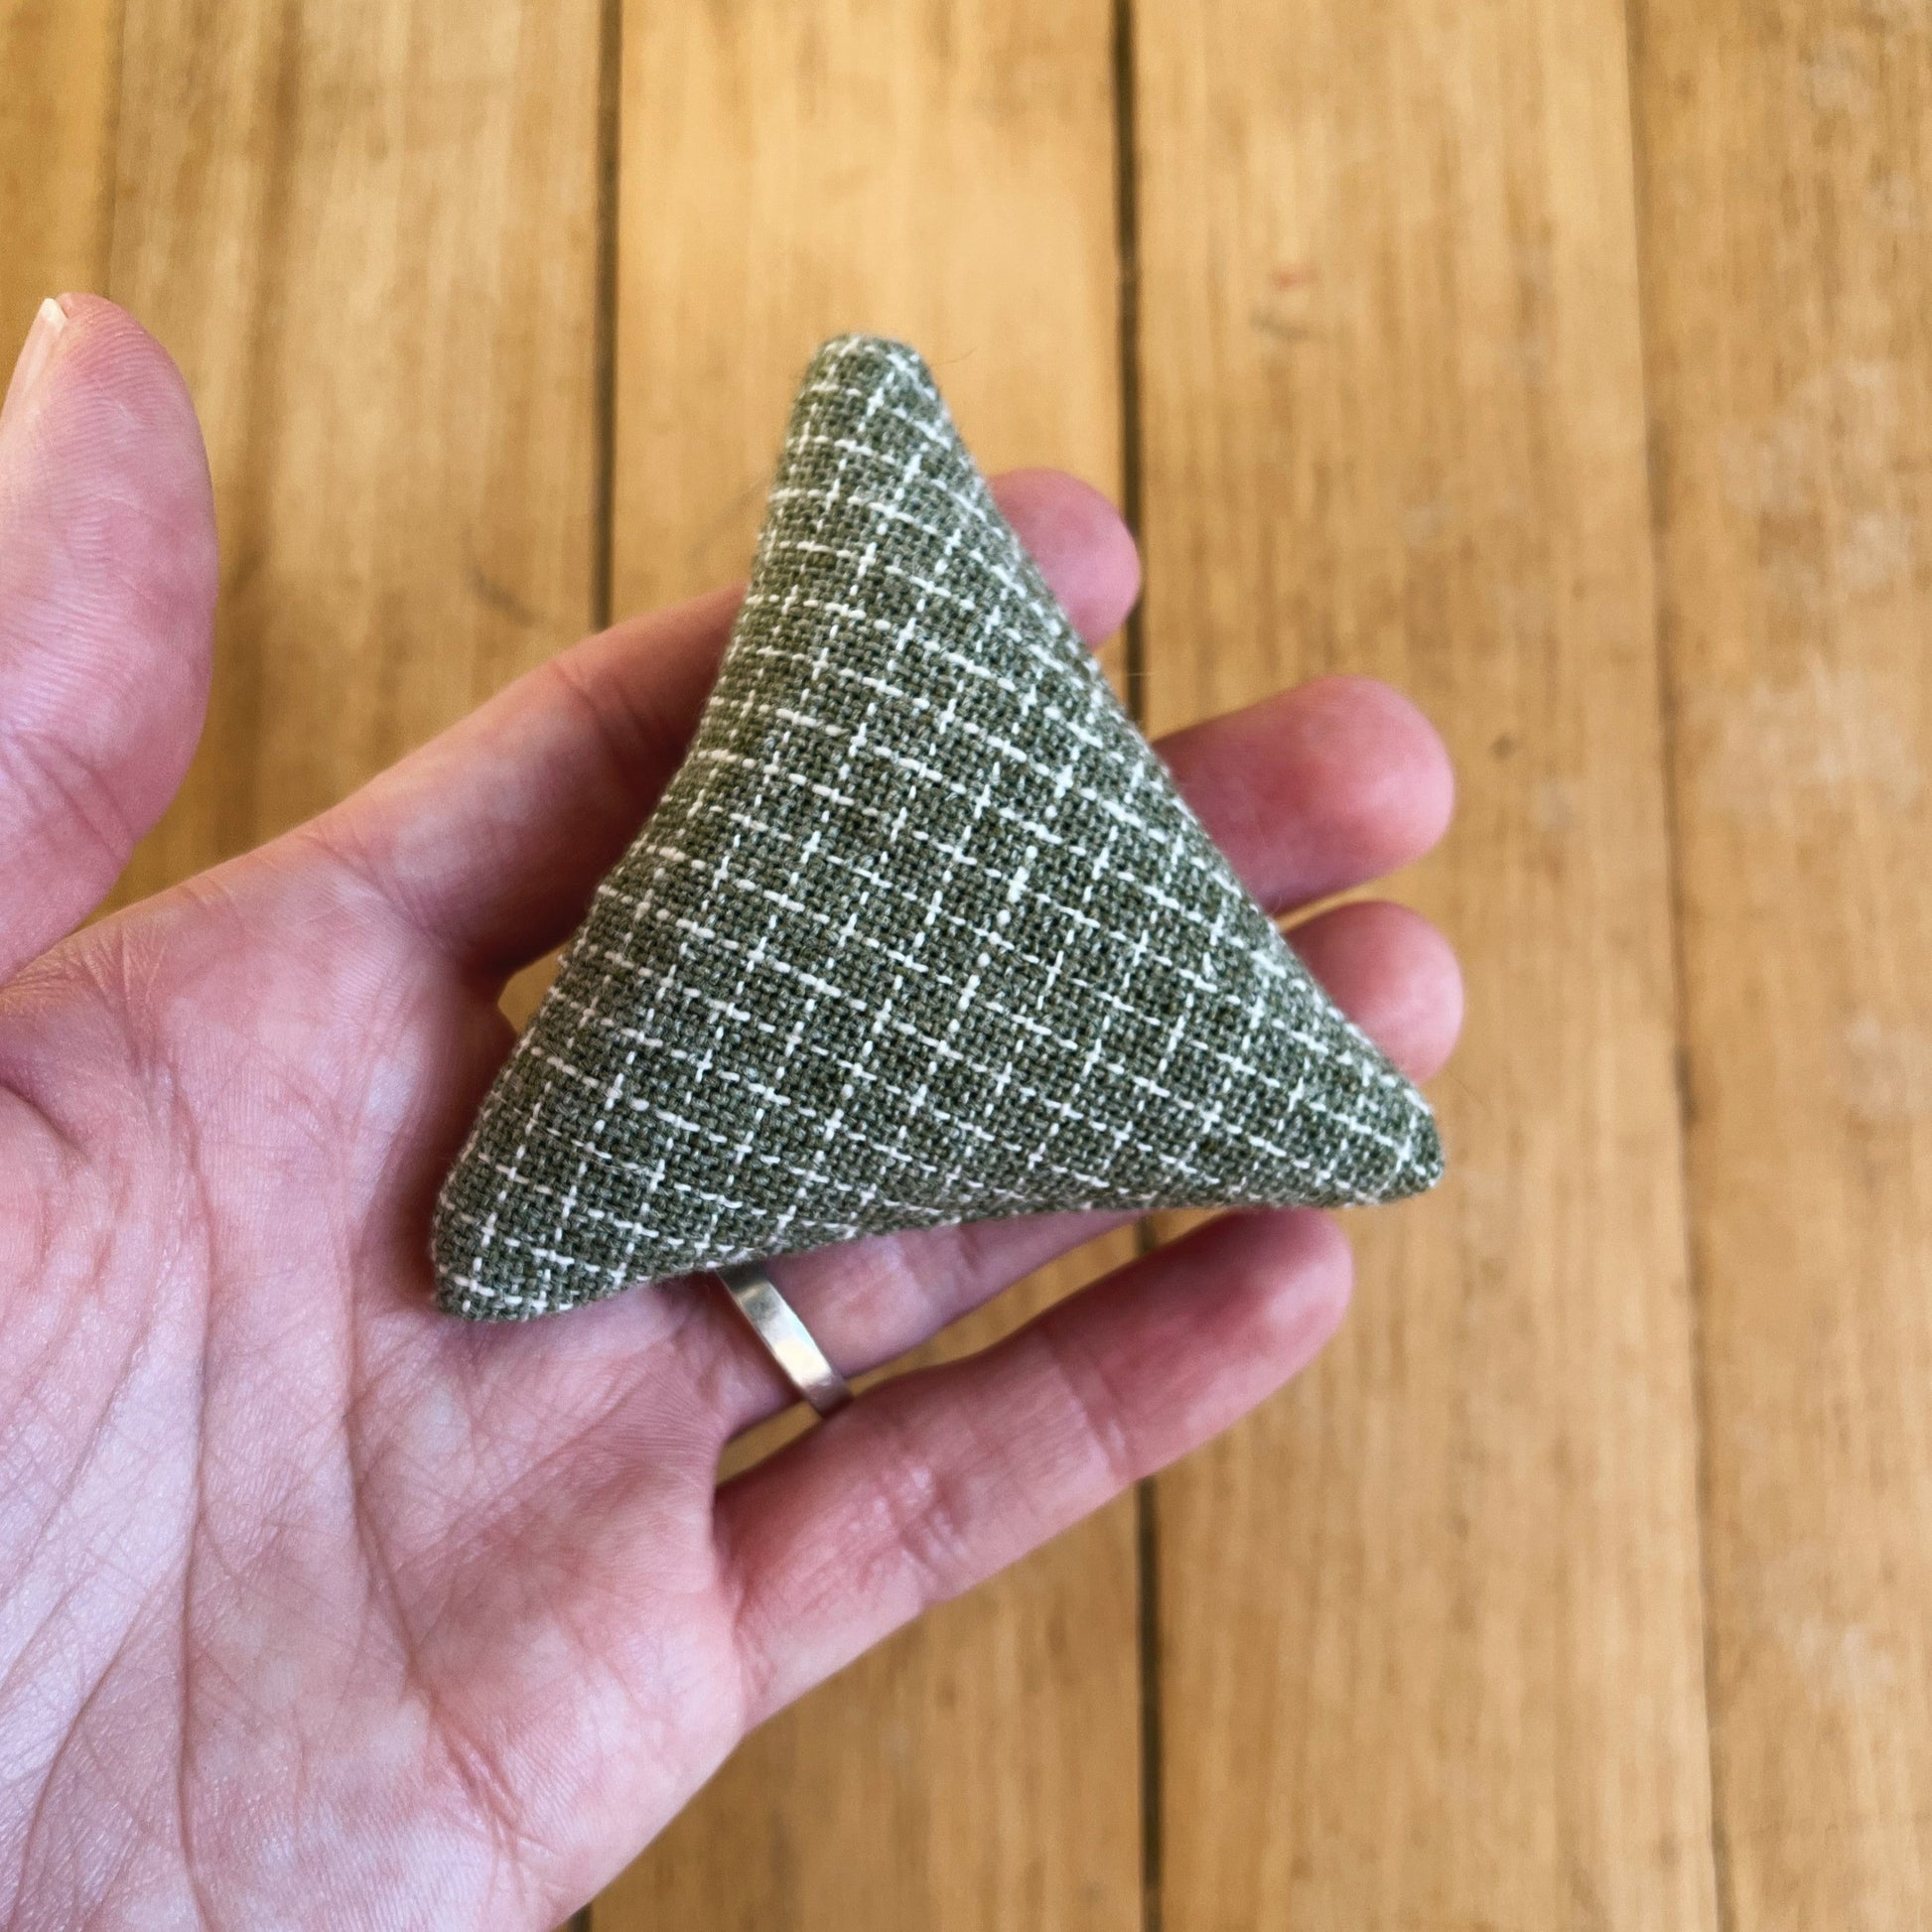 light green and white plaid triangle shaped catnip toy.